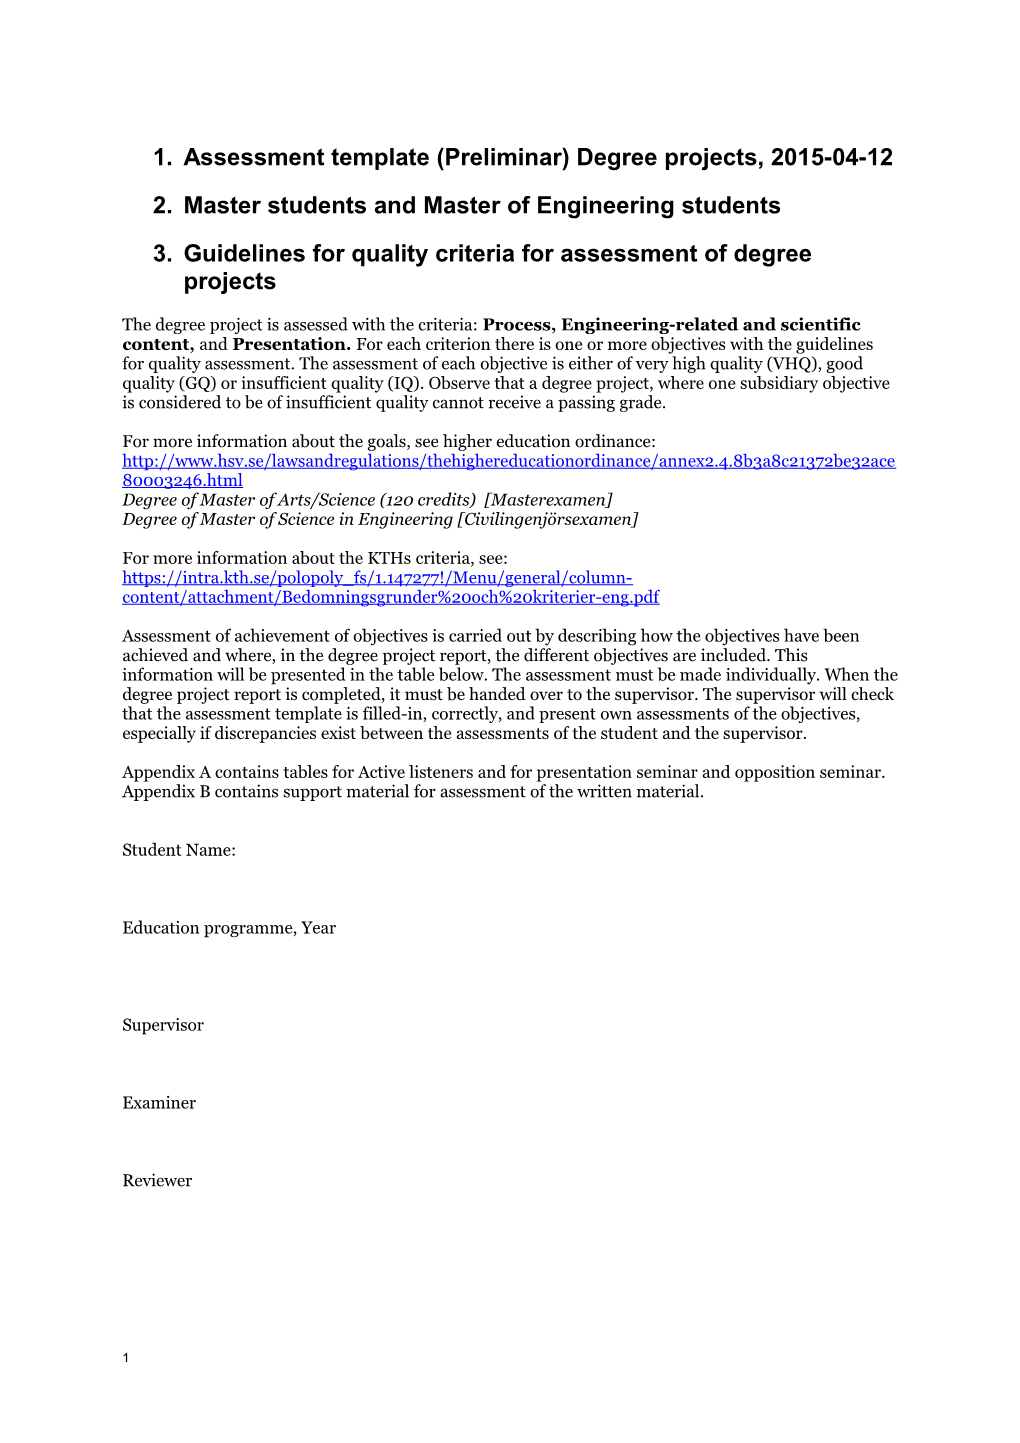 Assessment Template(Preliminar) Degree Projects, 2015-04-12